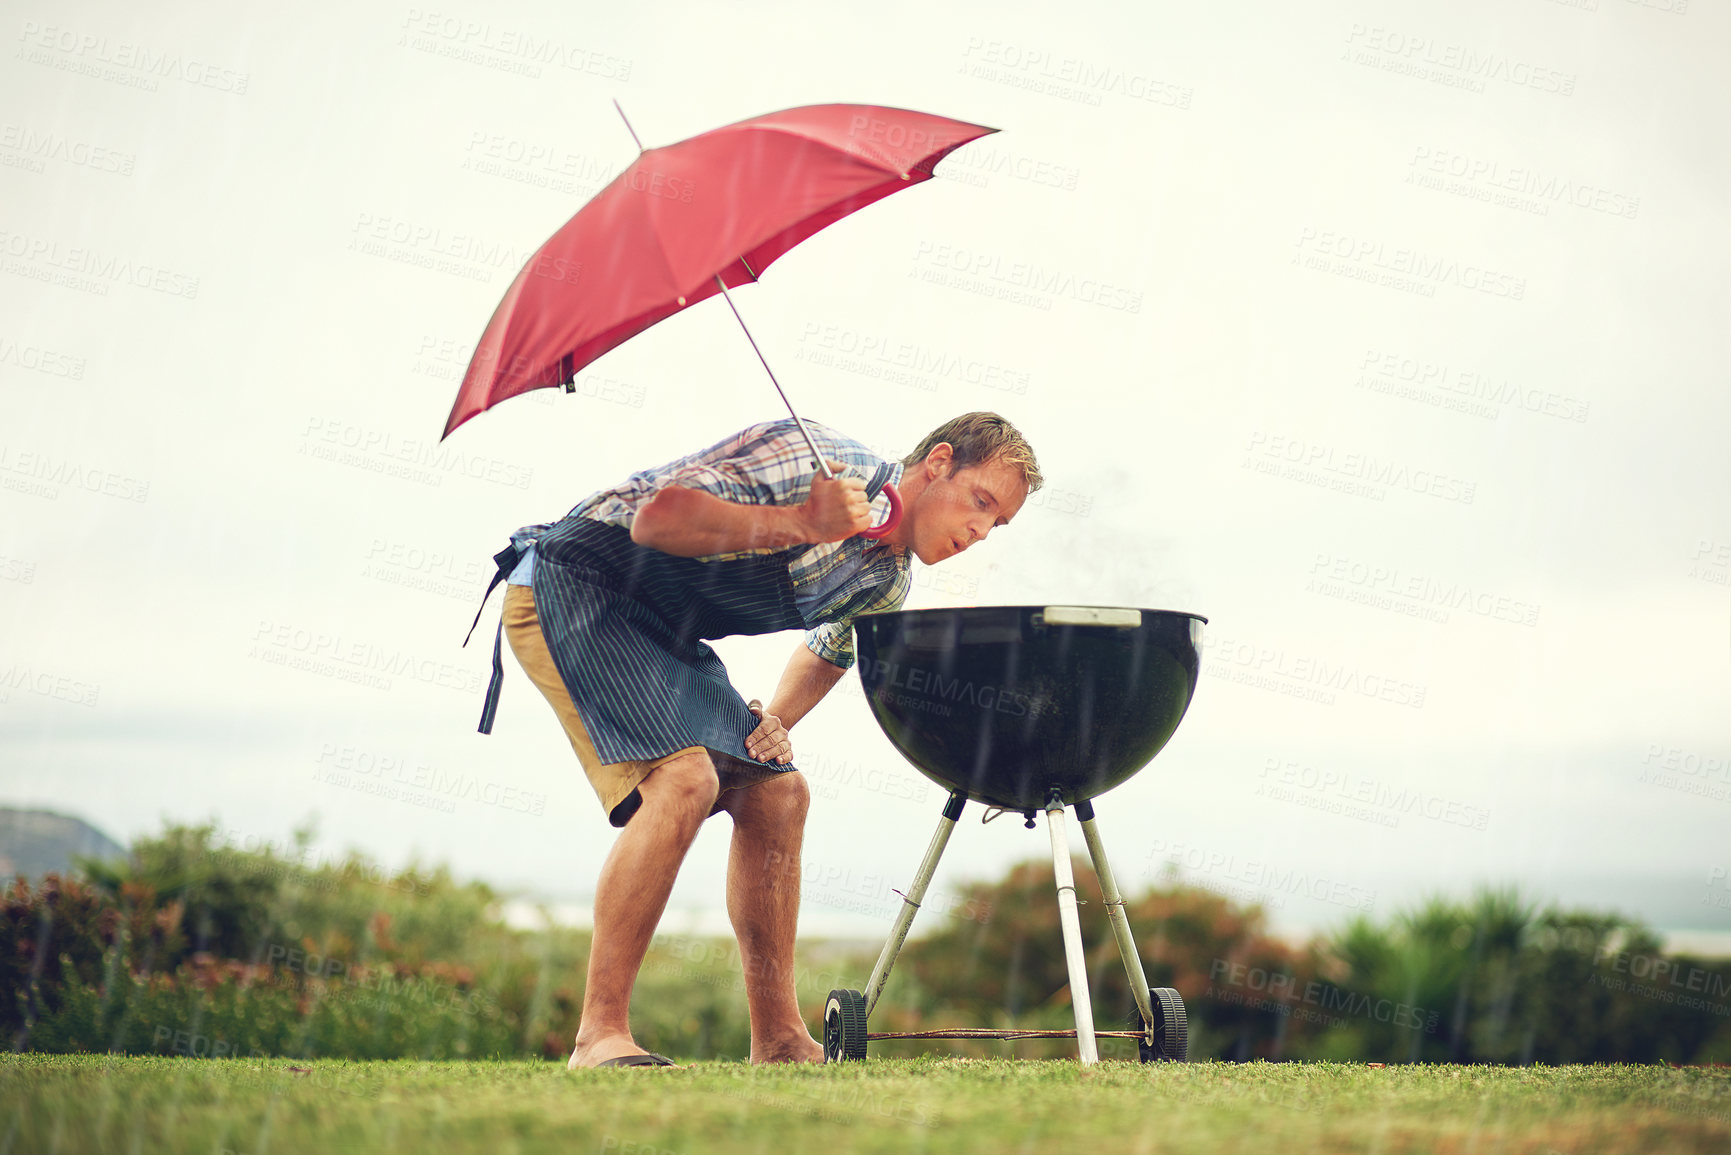 Buy stock photo Umbrella, rain and a man outdoor to barbecue food for cooking or insurance in the winter season. Storm, weather and grill with a male person getting wet while trying to bbq on a grass lawn or garden